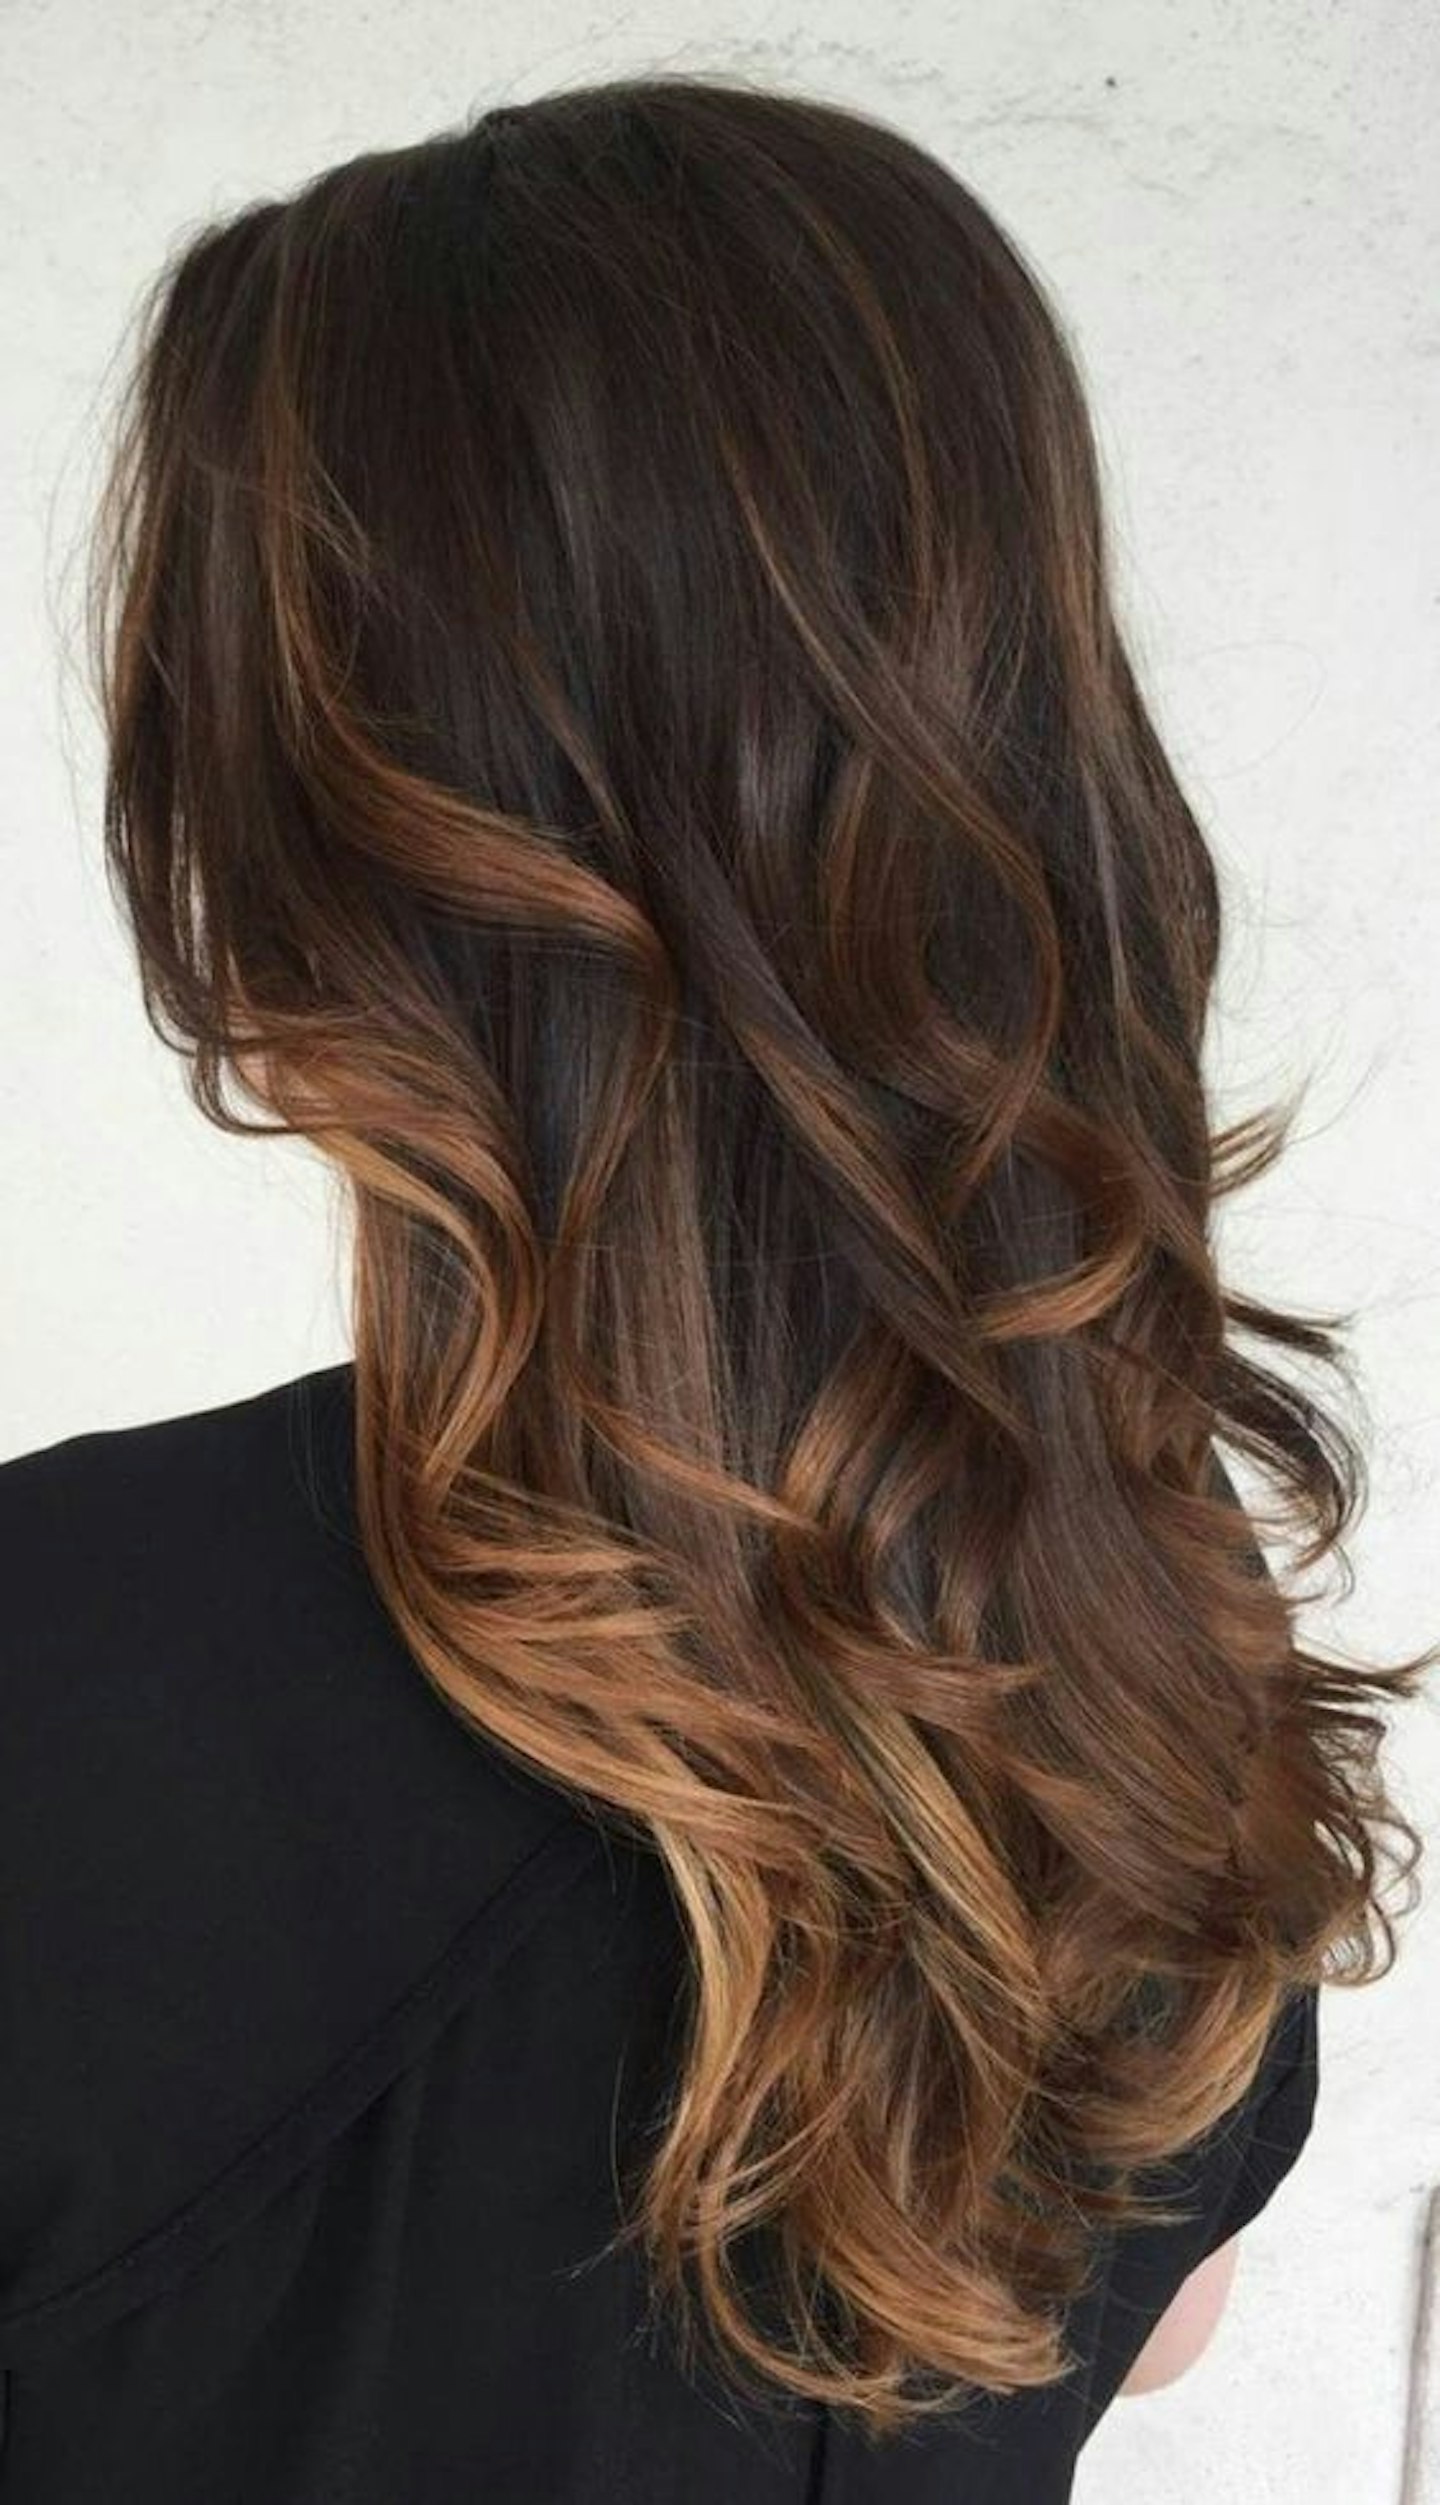 Taking the lighter tones where your hair would organically brighten in the sun makes for a natural look.